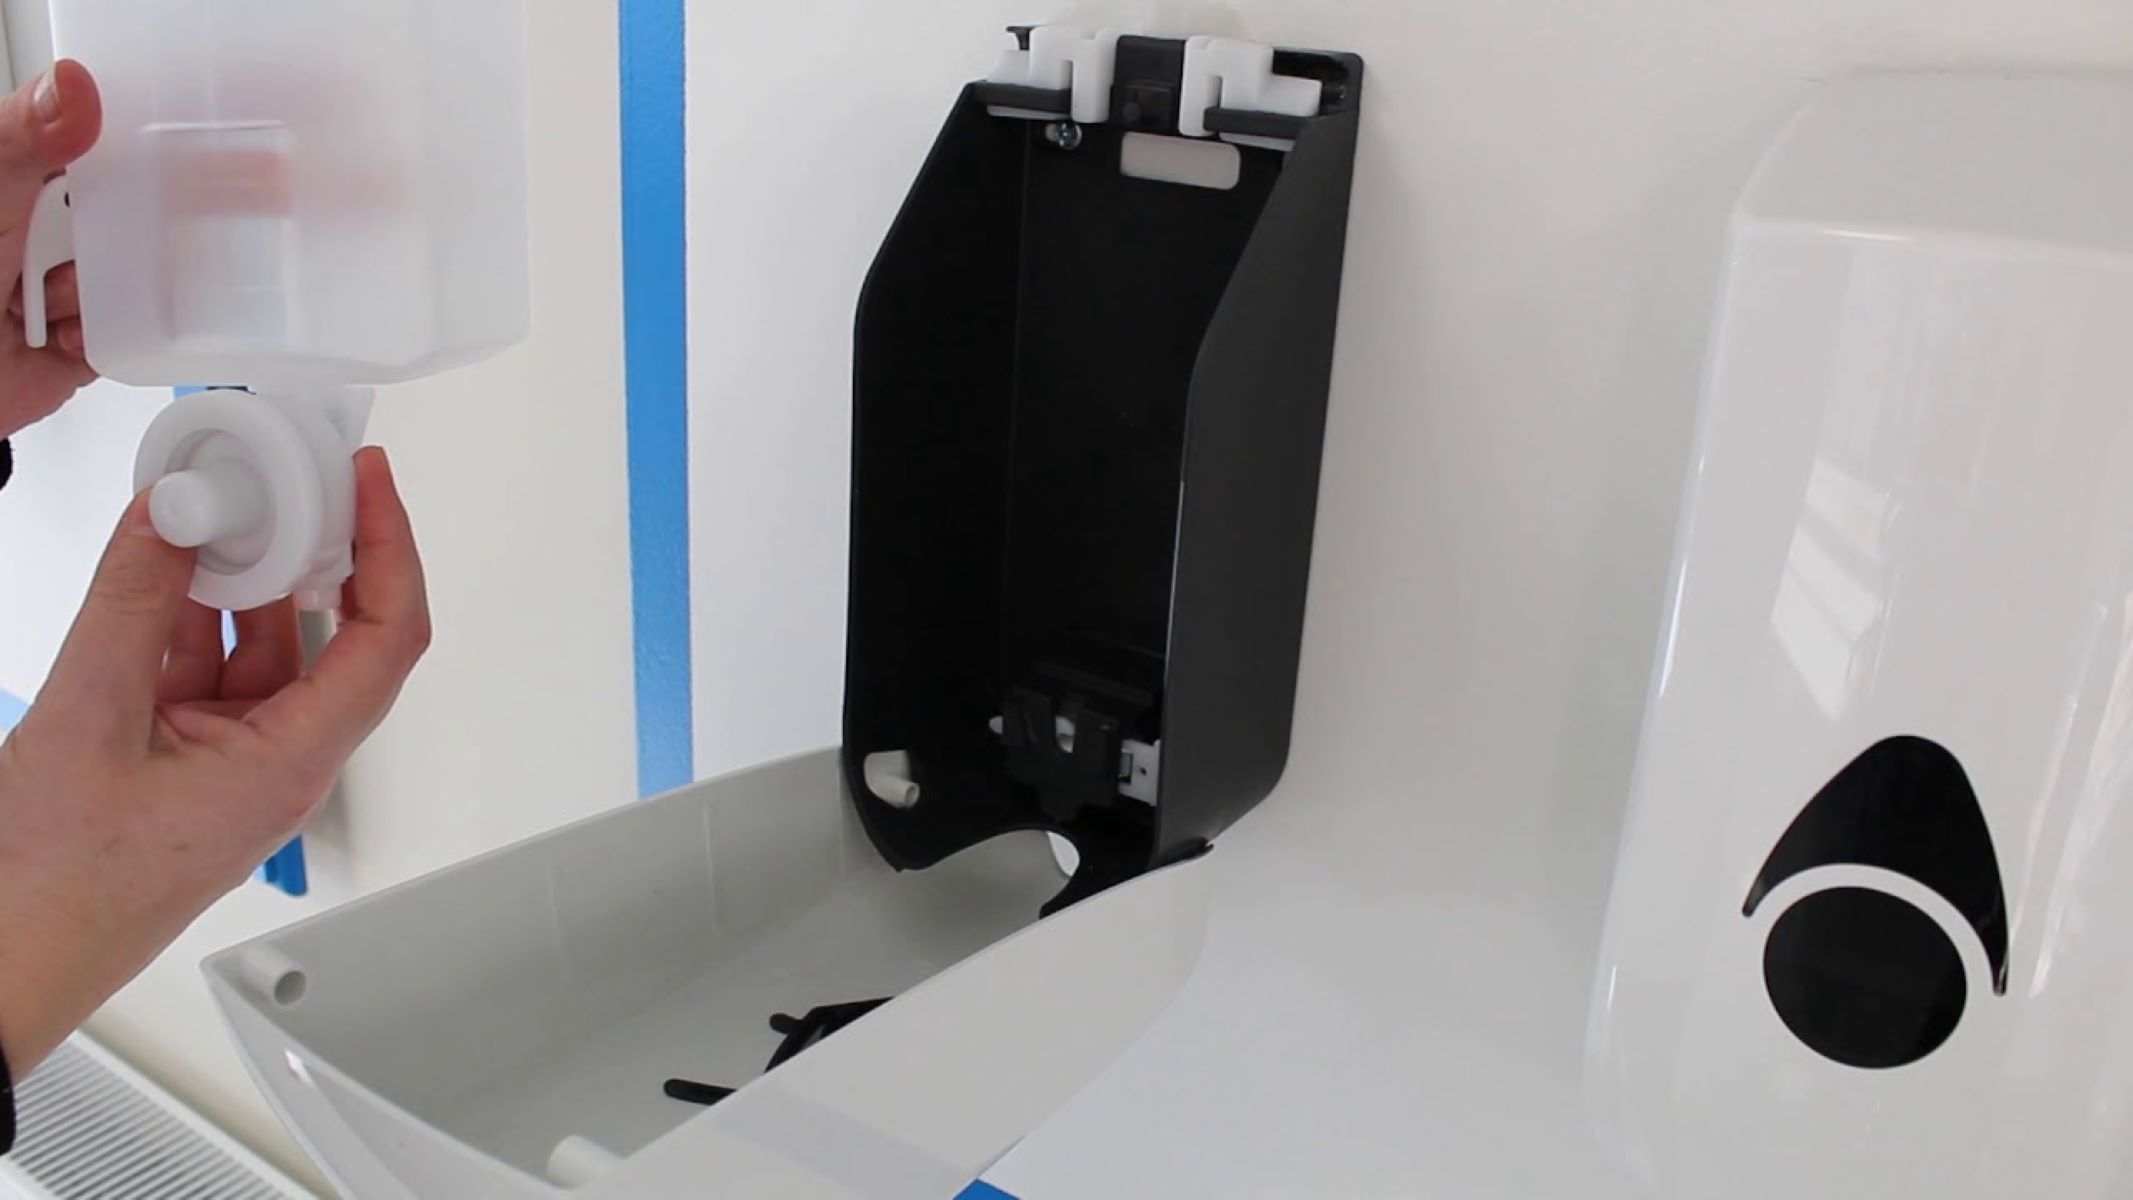 How To Open A Soap Dispenser On The Wall